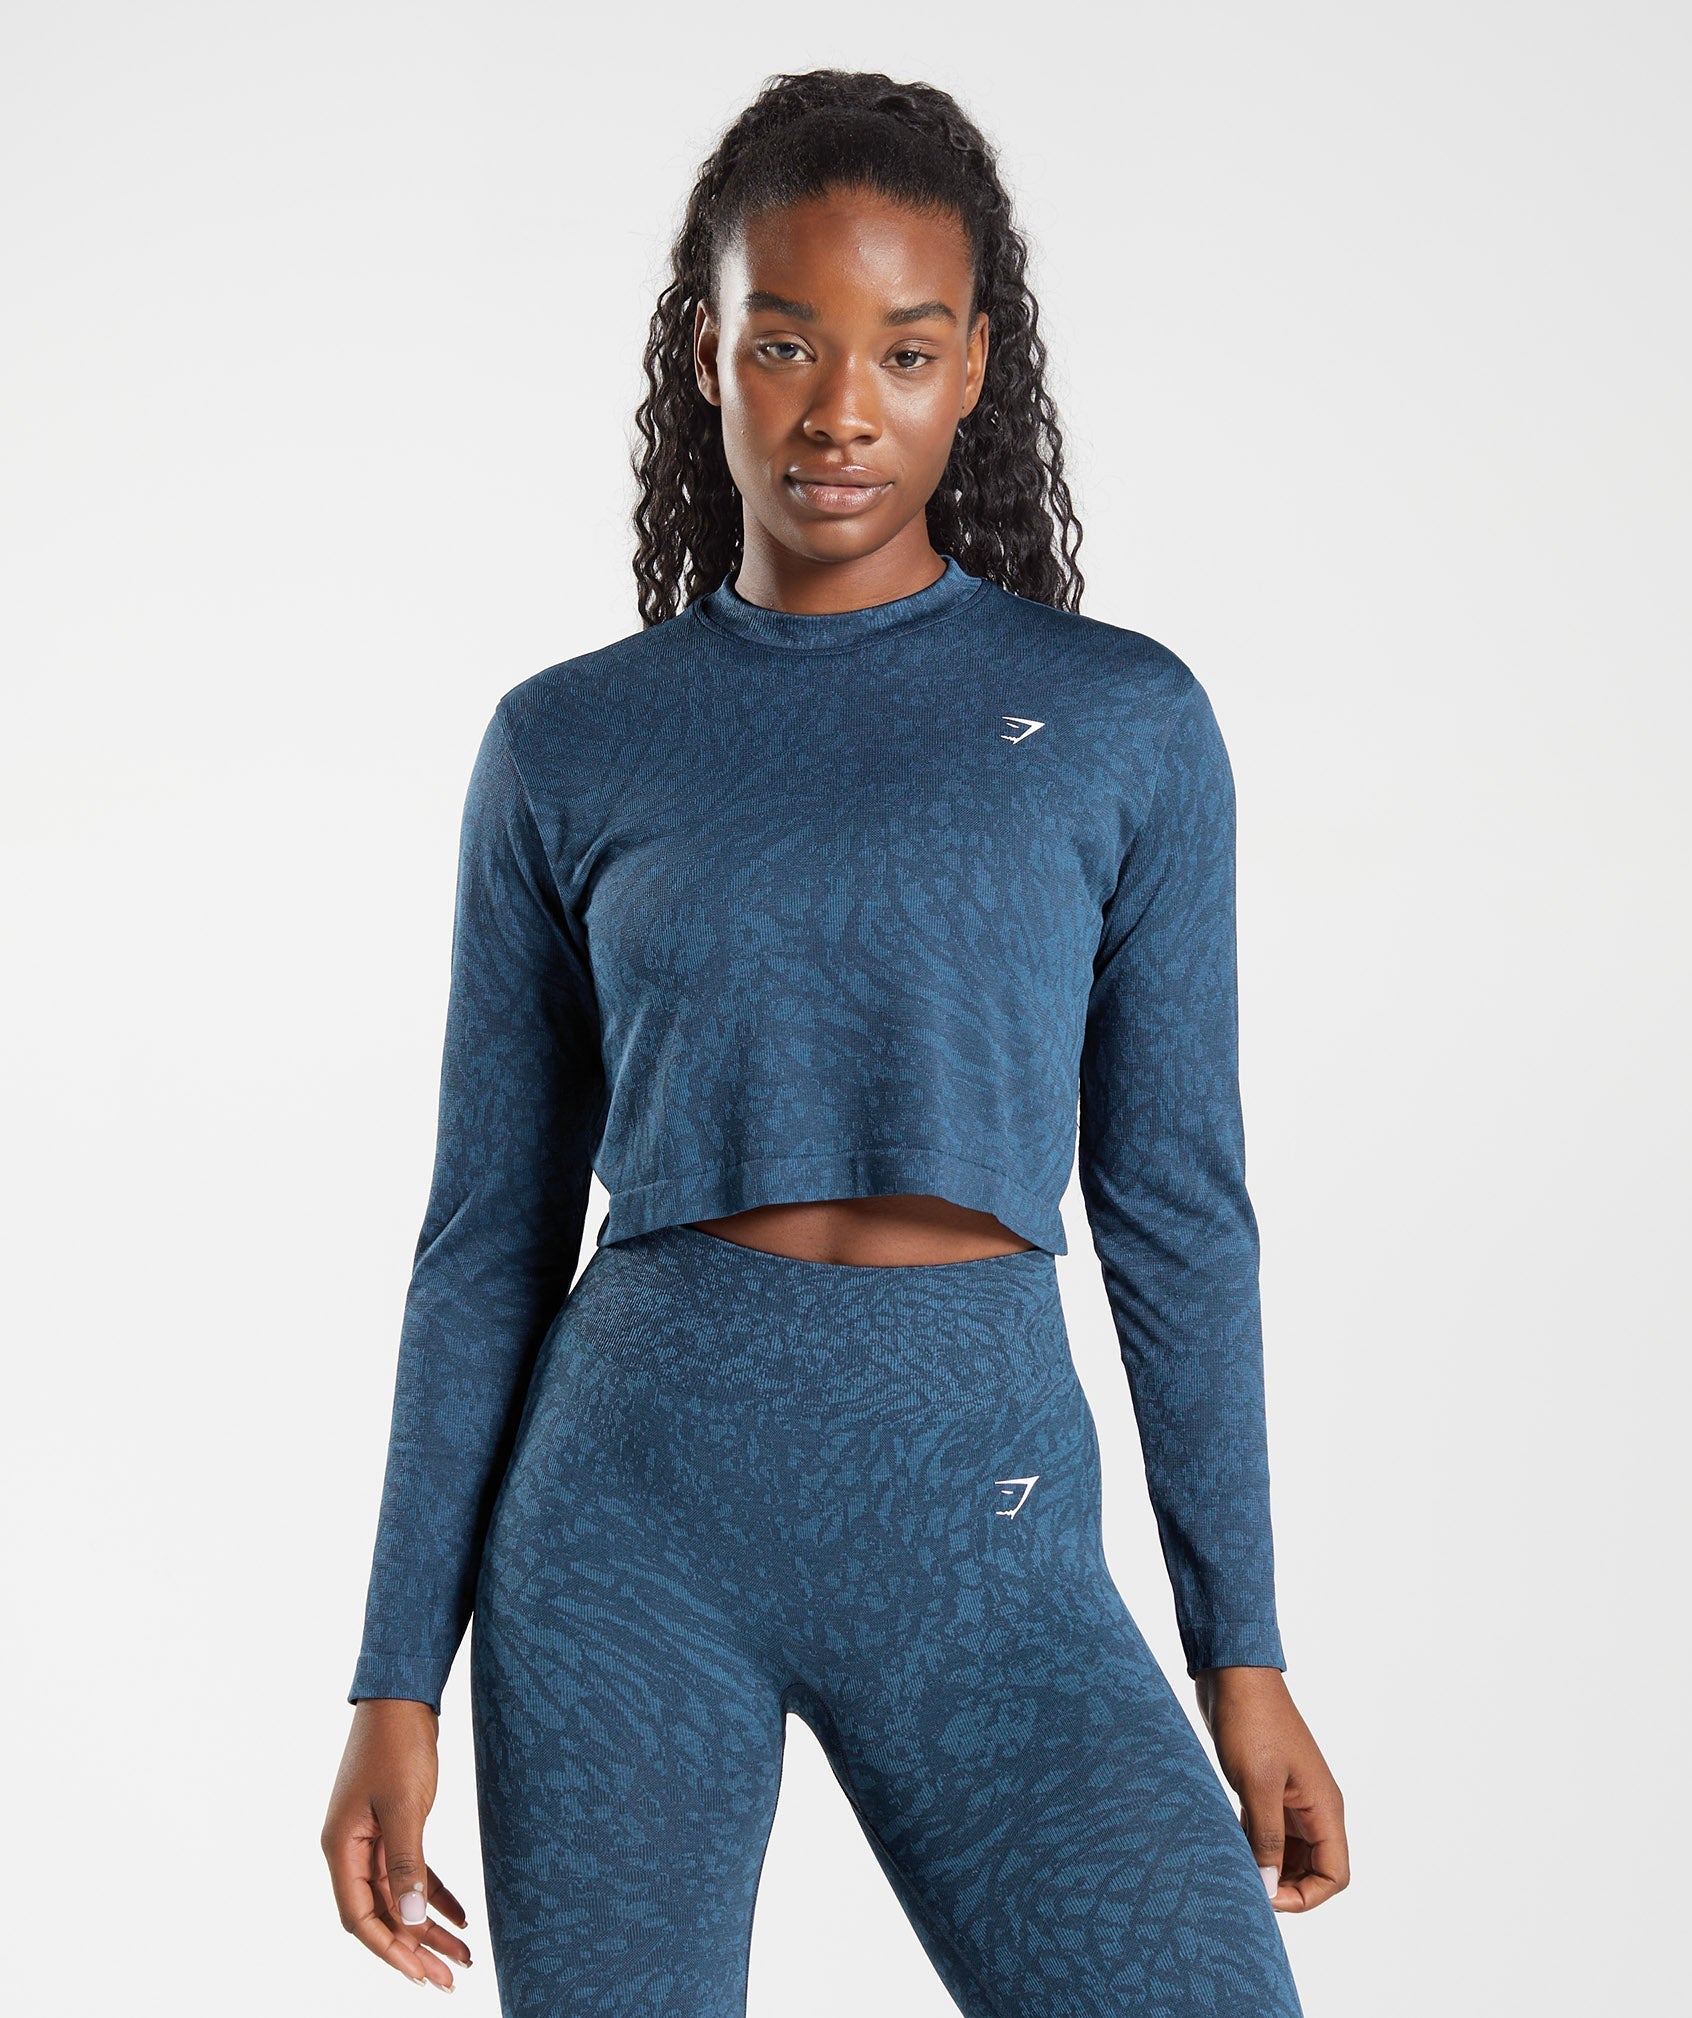 Gym Tops & Gym T-Shirts for Women - Gymshark